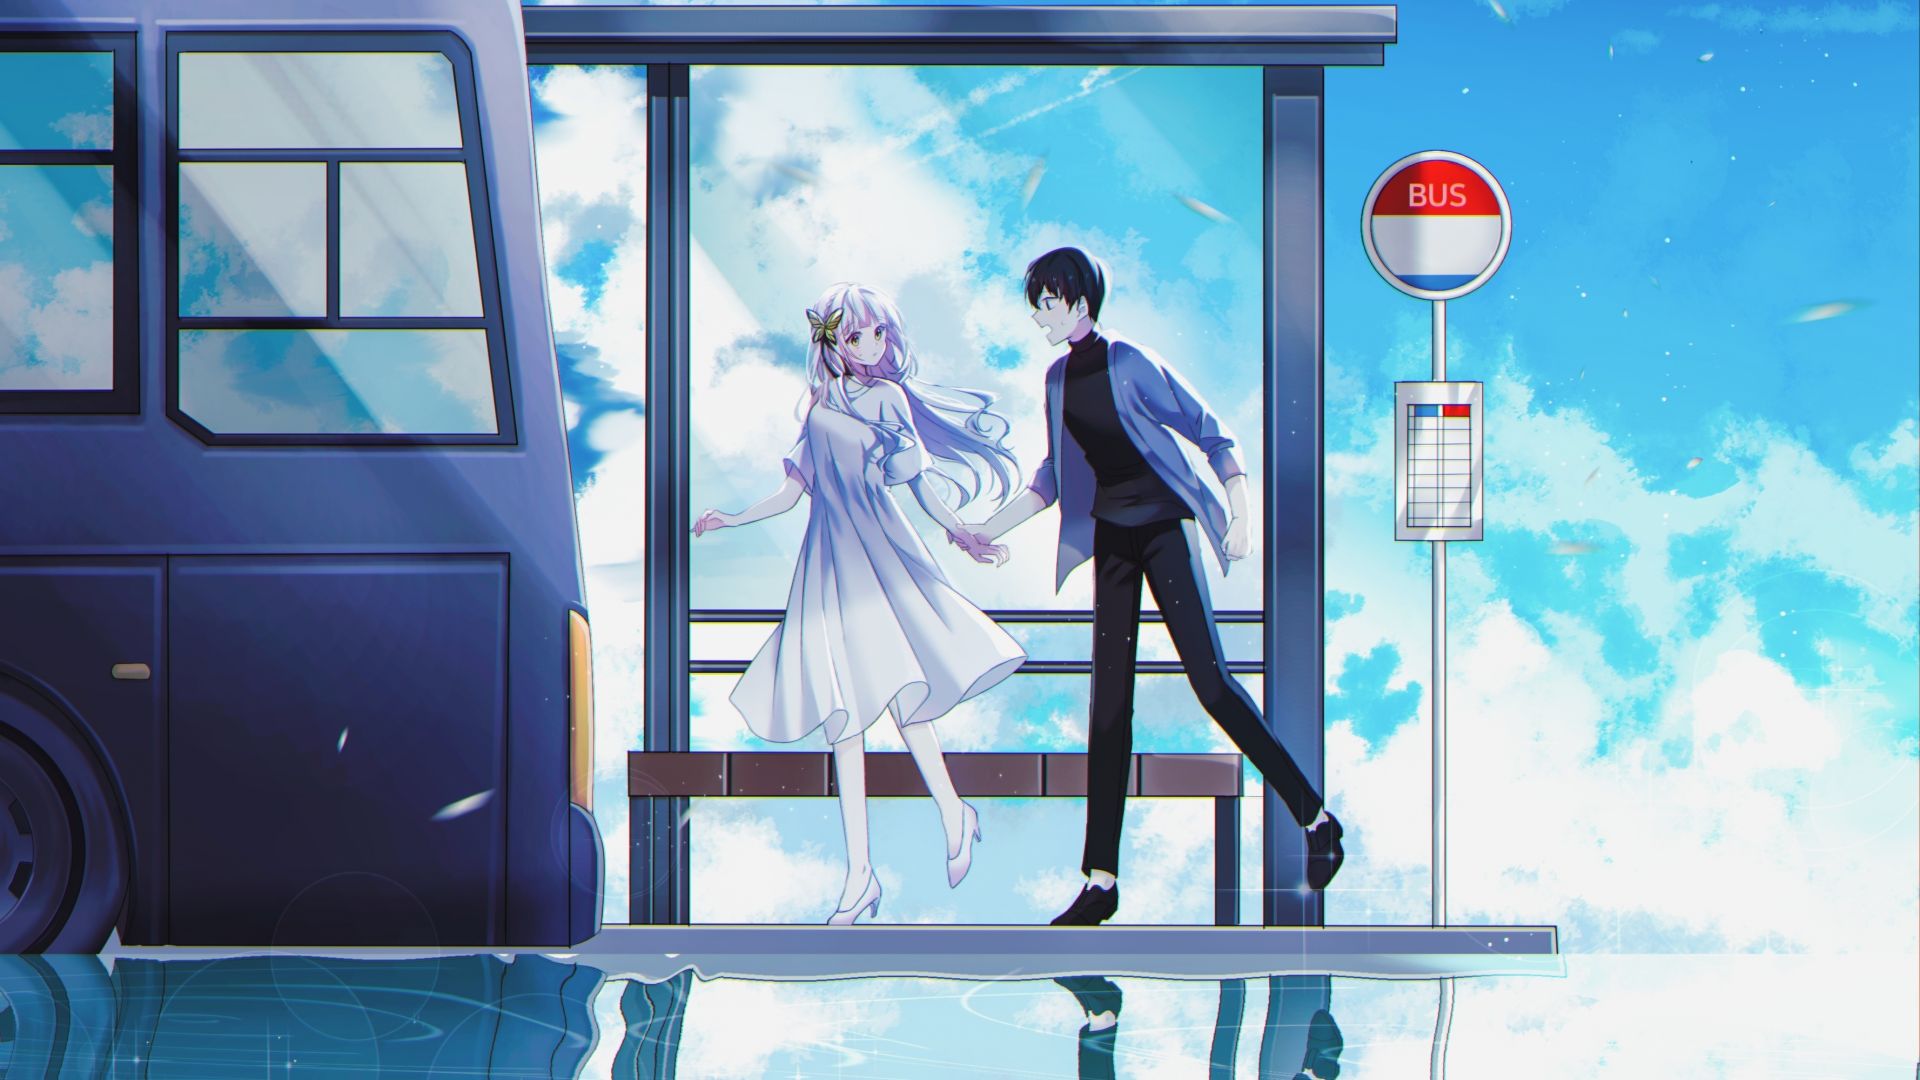 Please Stop!, Anime, Original, Bus Stop, Art Wallpaper, HD Image, Picture, Background, 921128